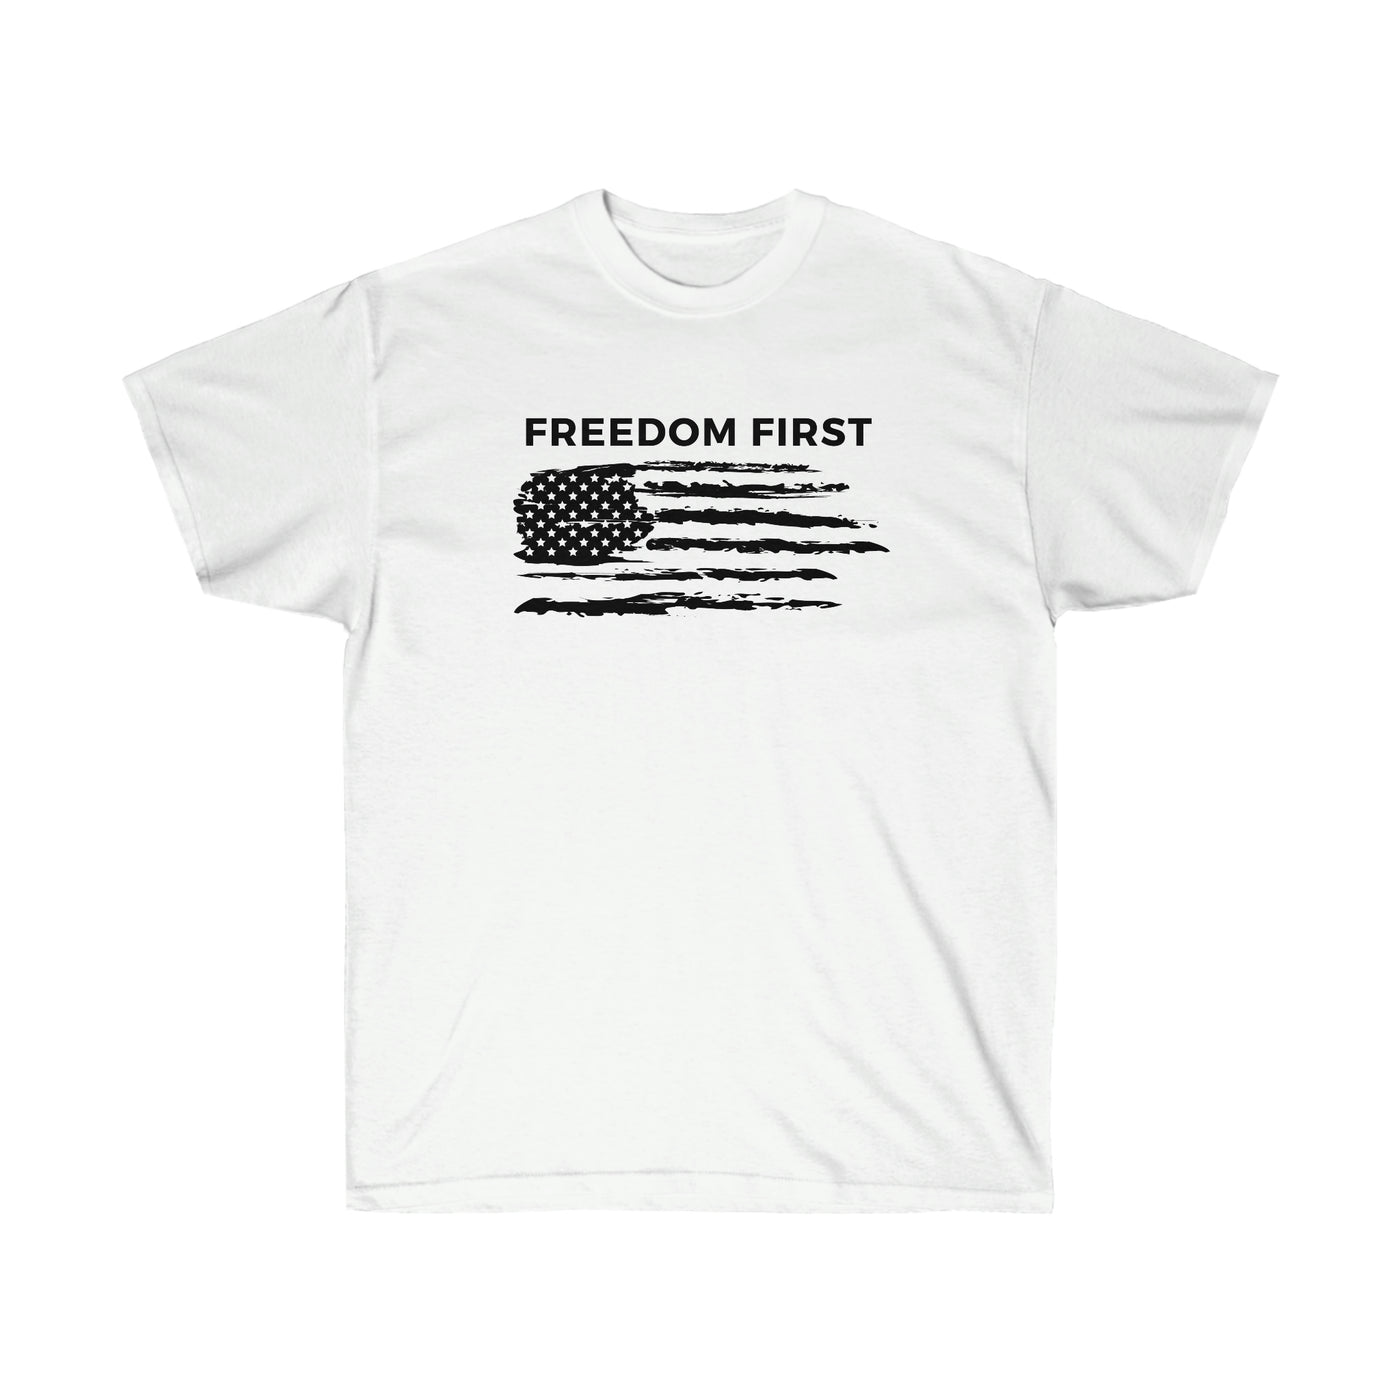 ULTRA FREE PATRIOTIC TEE - Freedom First Supply